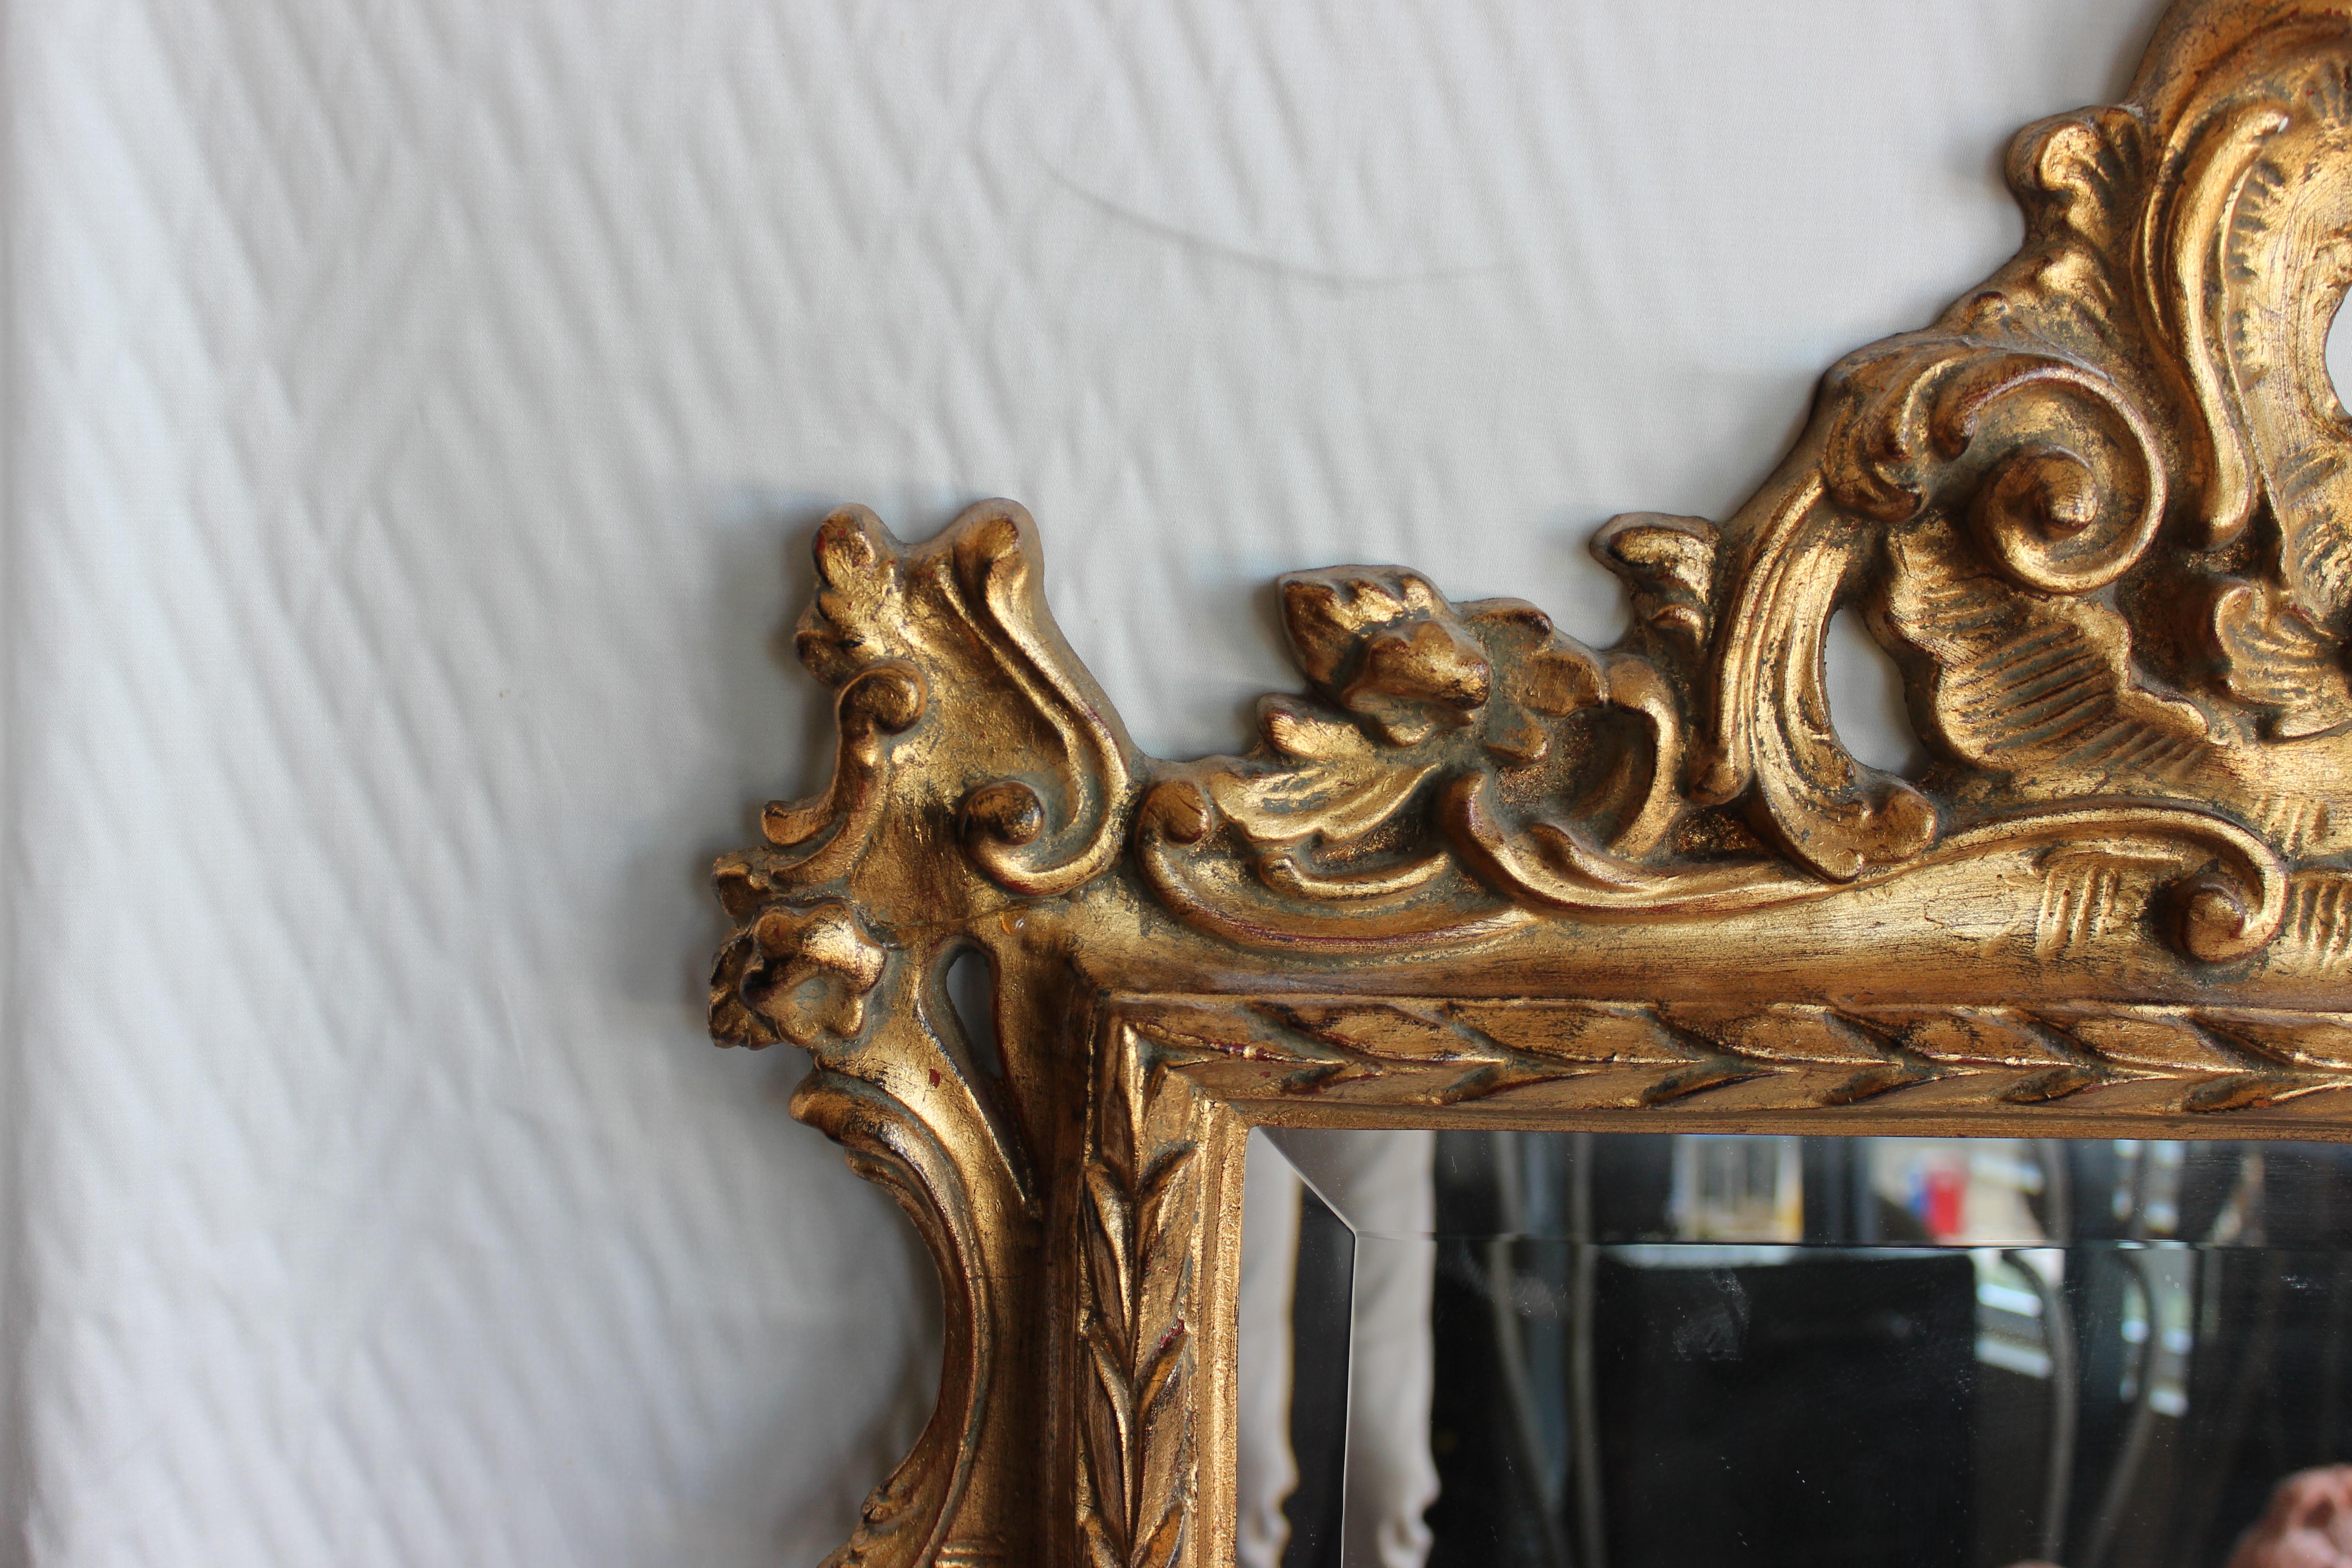 Mirror - Rococo style - Resin - nice gold finish.